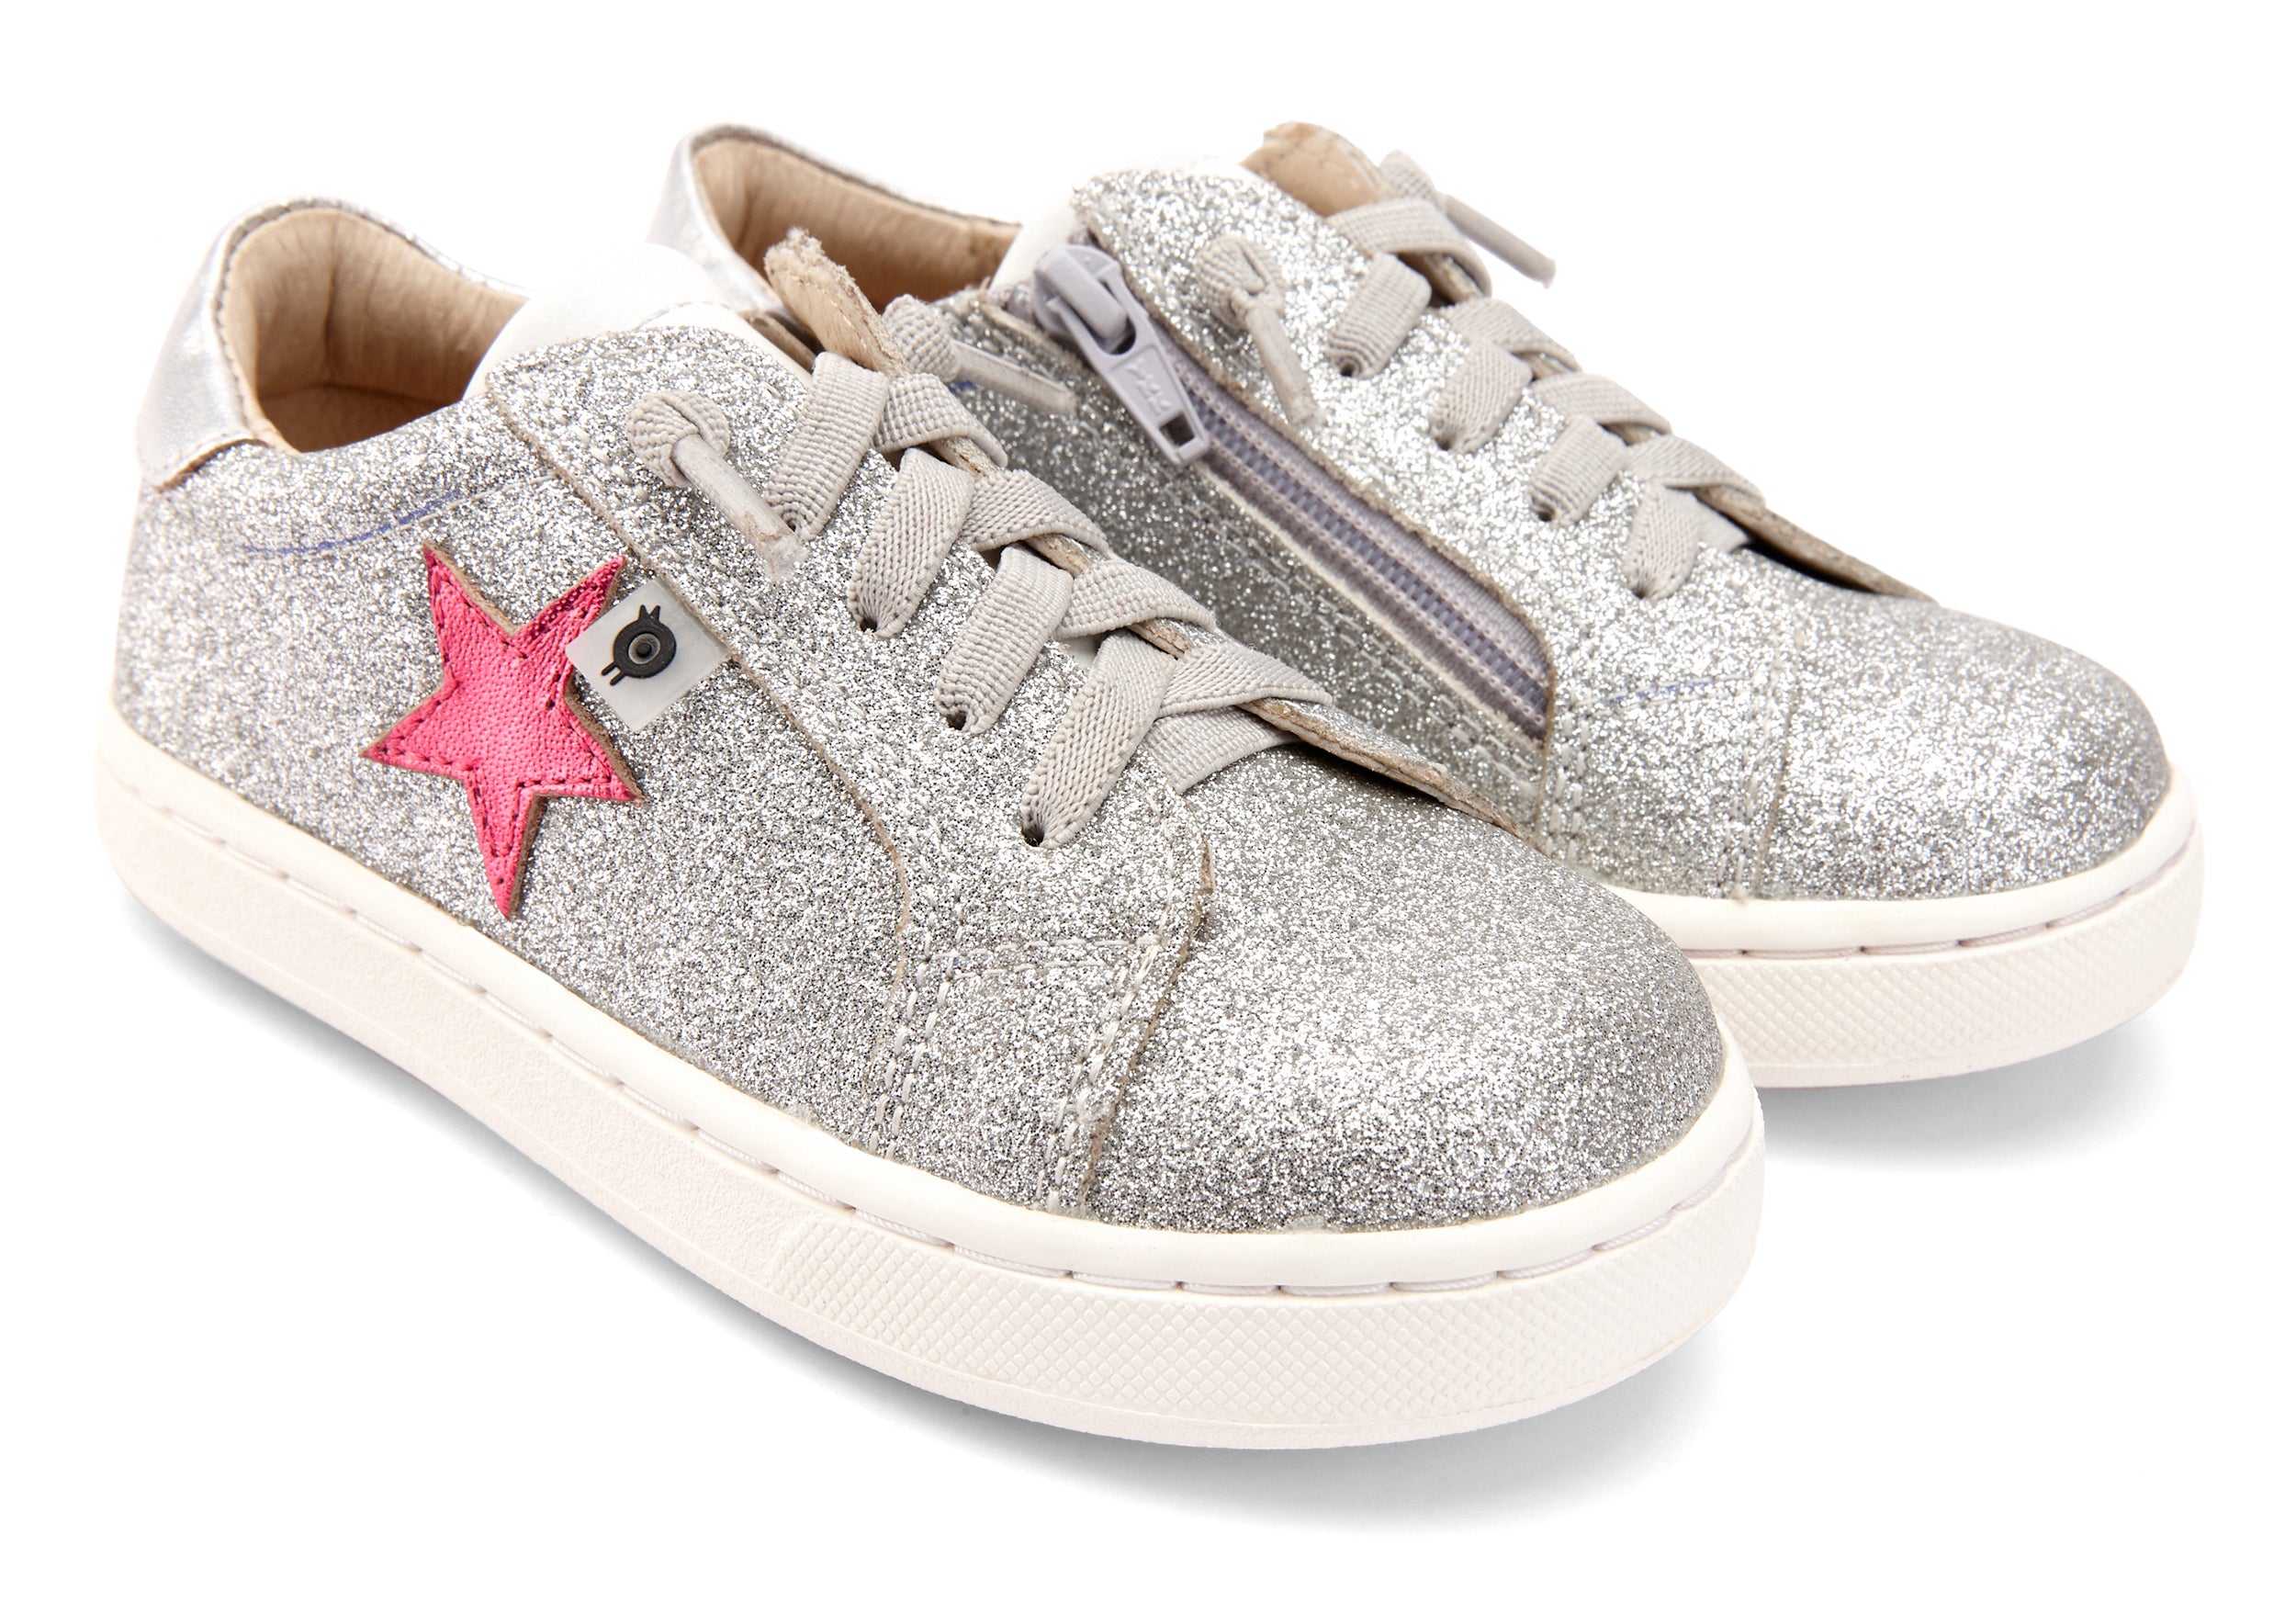 Old Soles Girl's Milky Way Sneaker Shoes - Glam Argent/Silver/Snow/Fuc ...